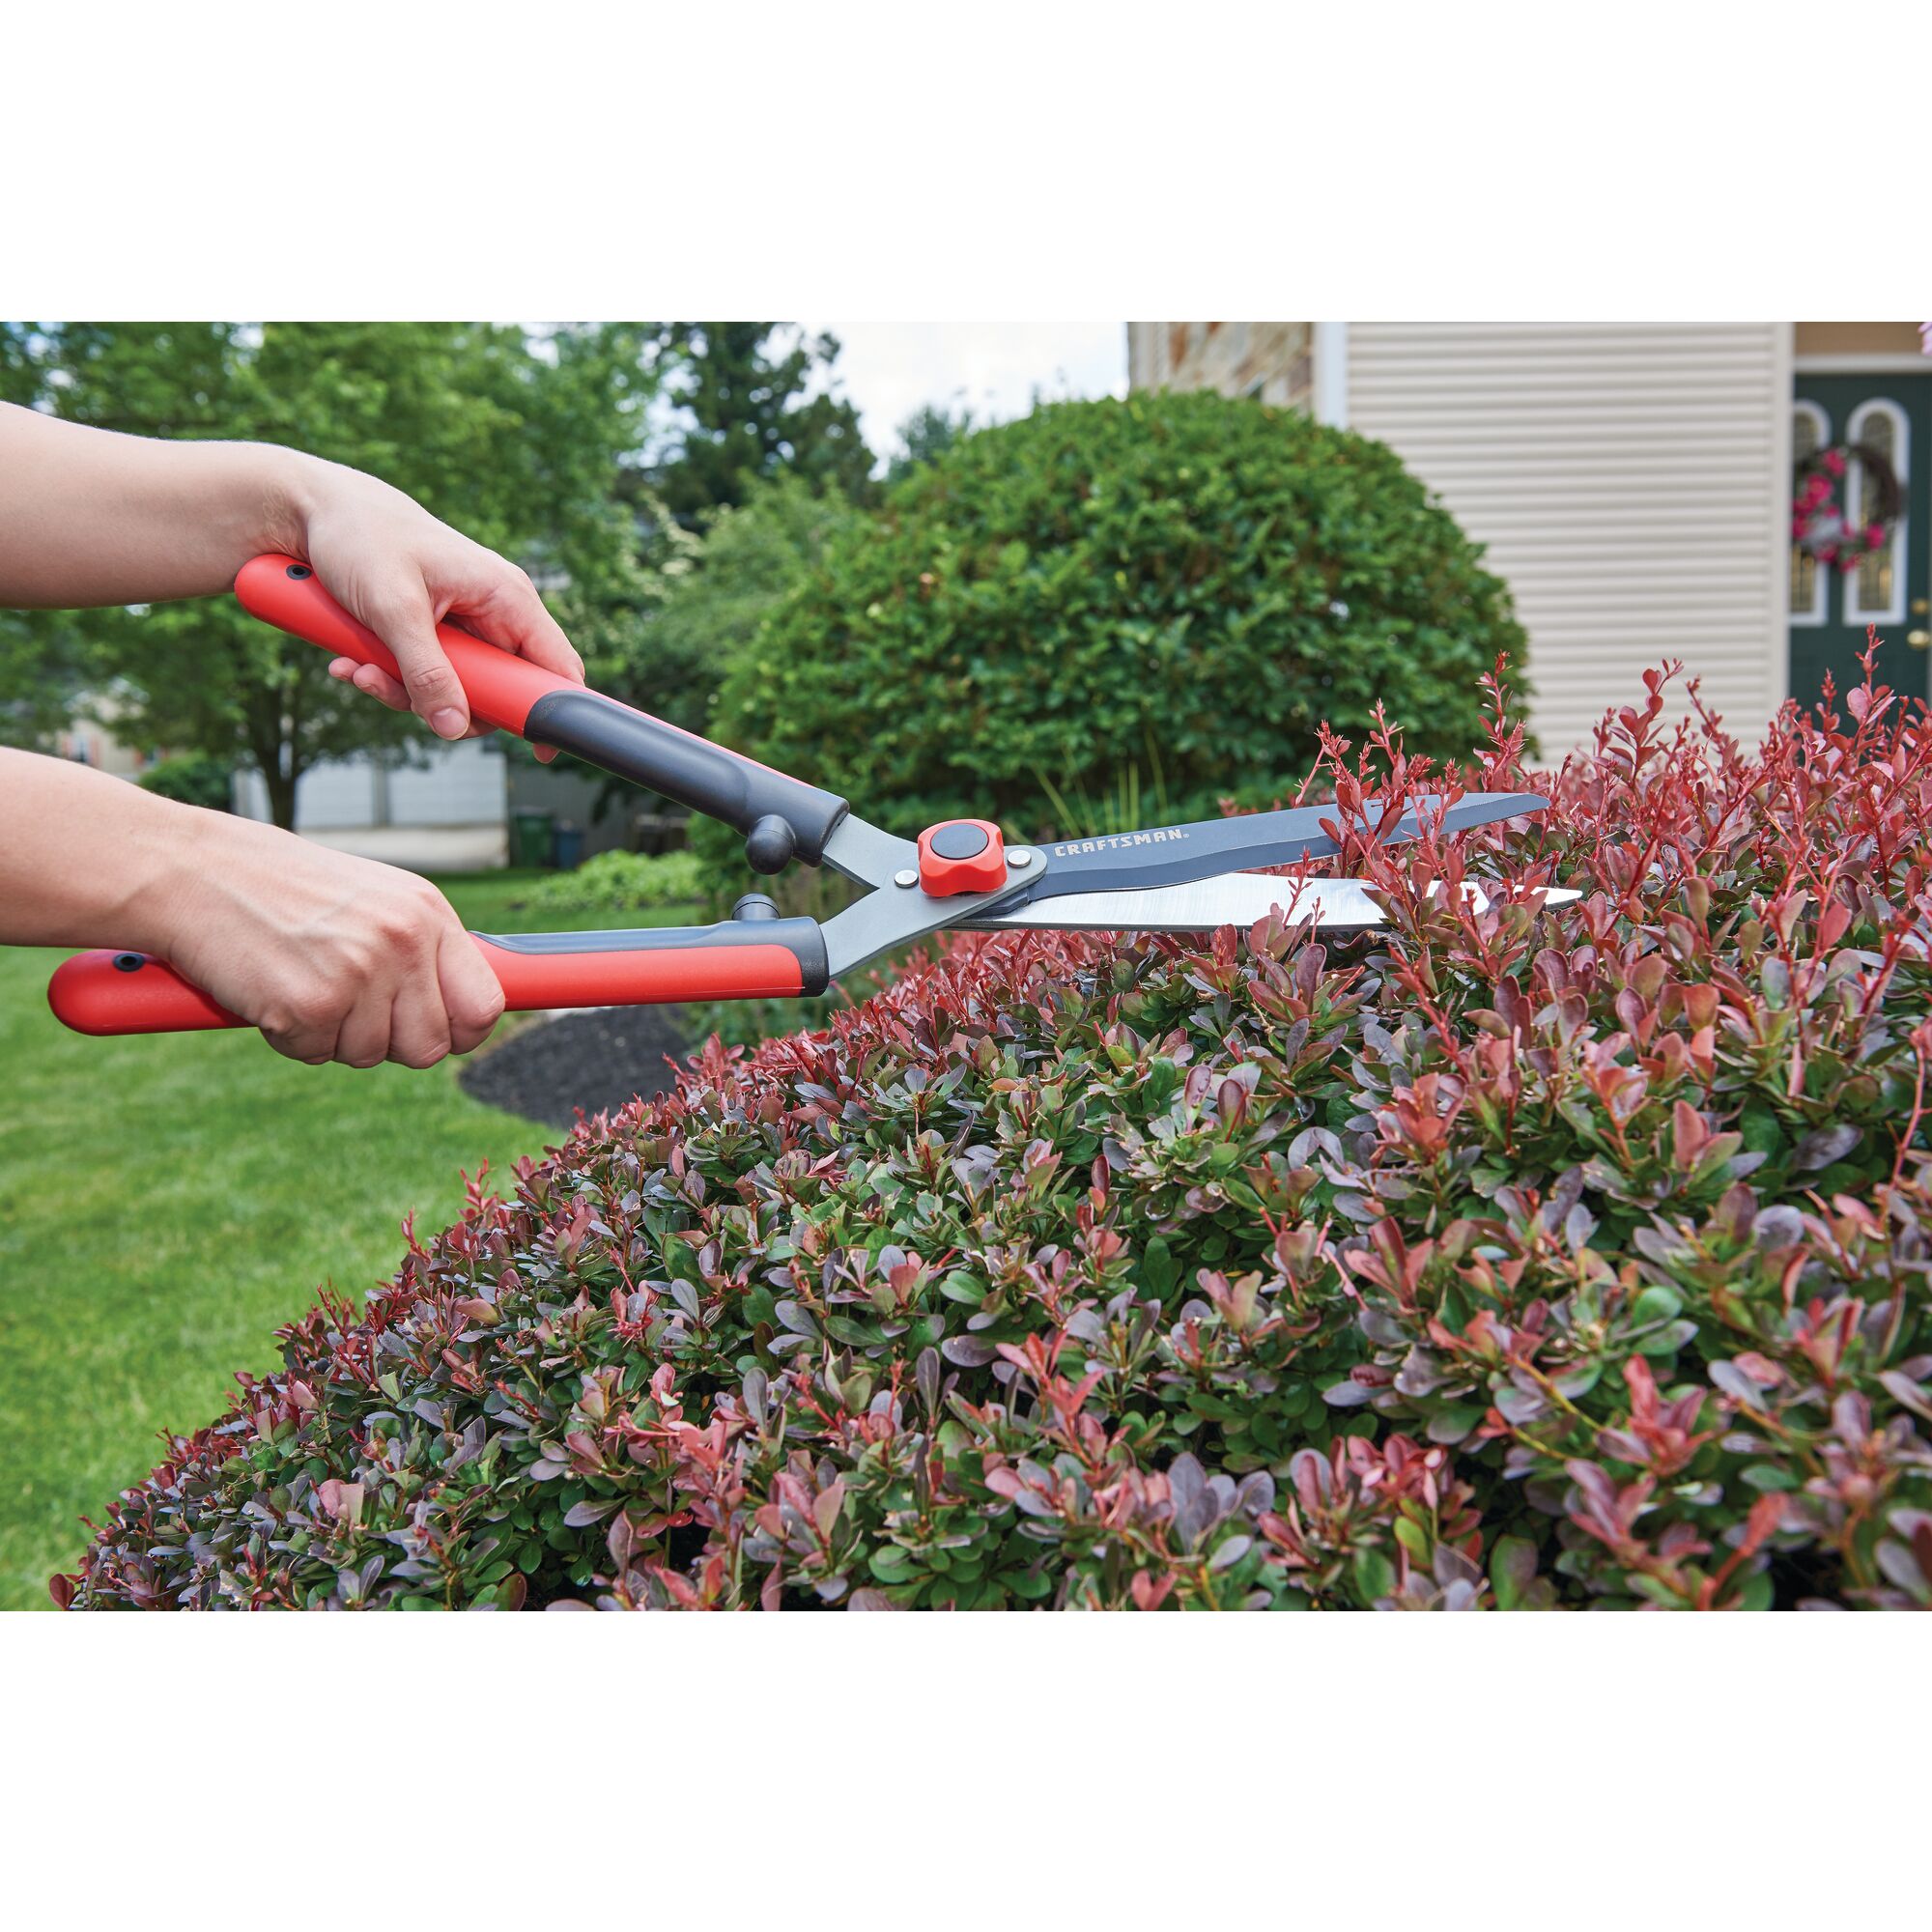 Hedge shears being used by a person to trim hedge.